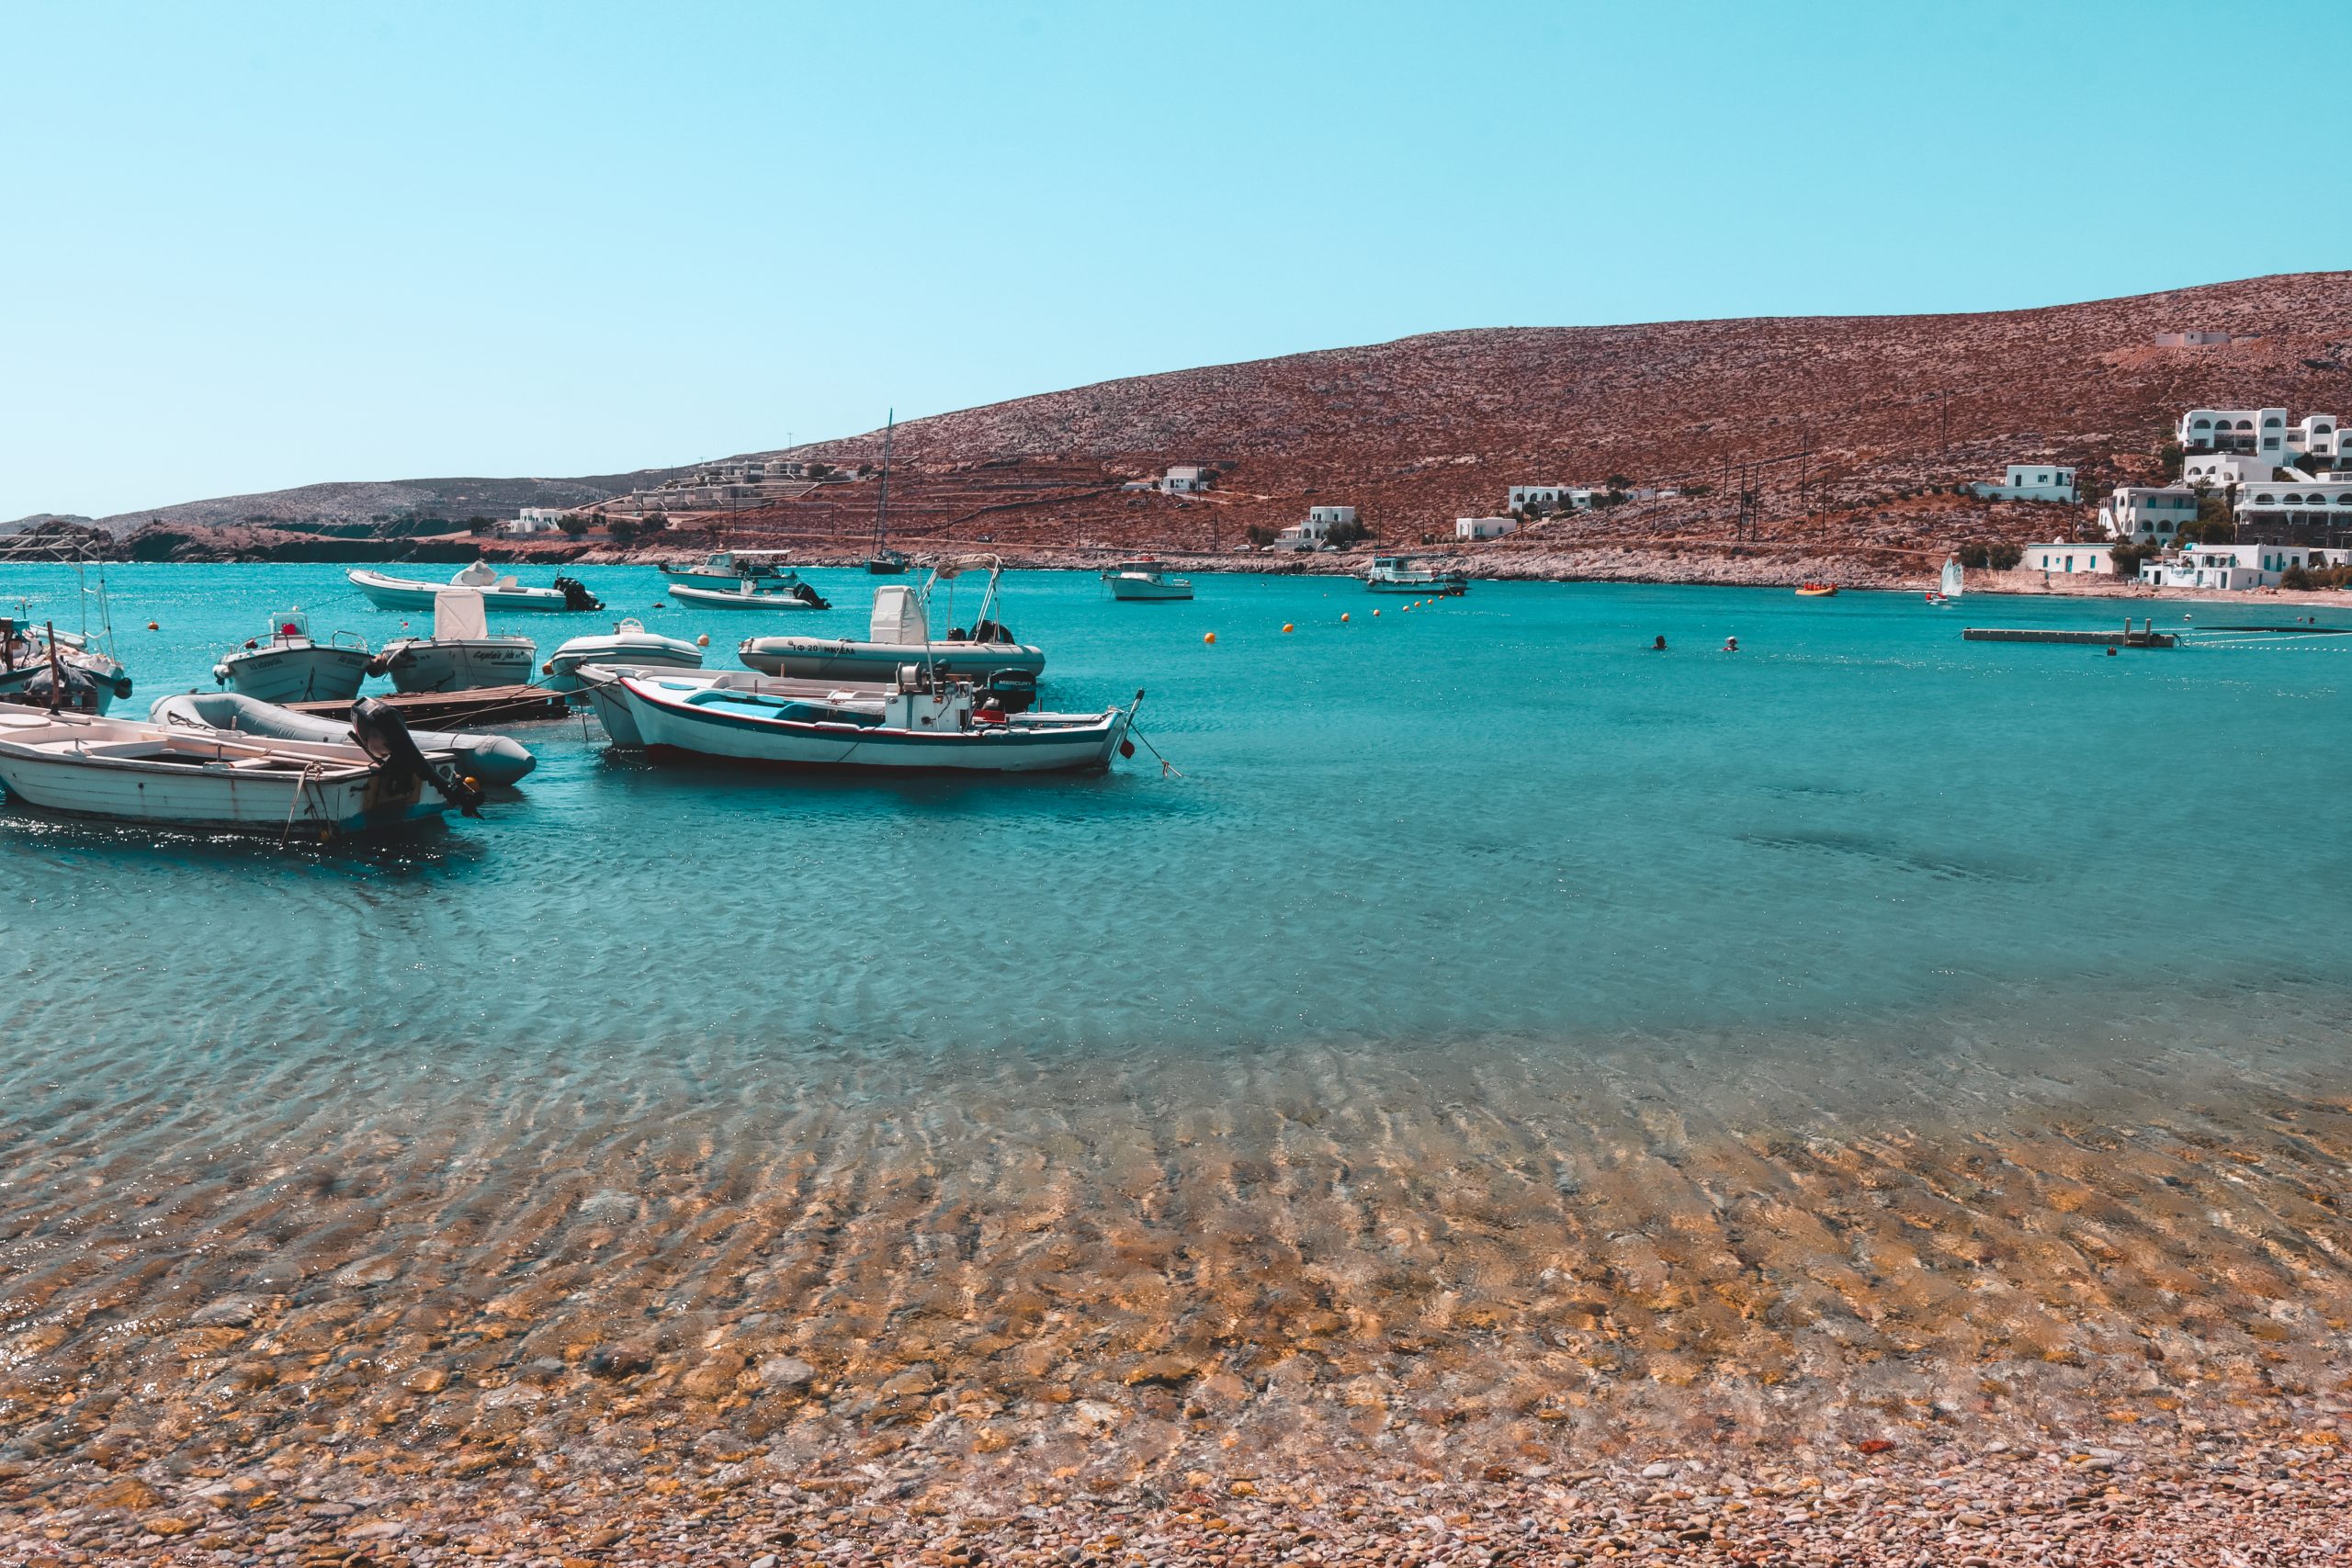 Turquoise ocean and boats. Where to go in Folegandros